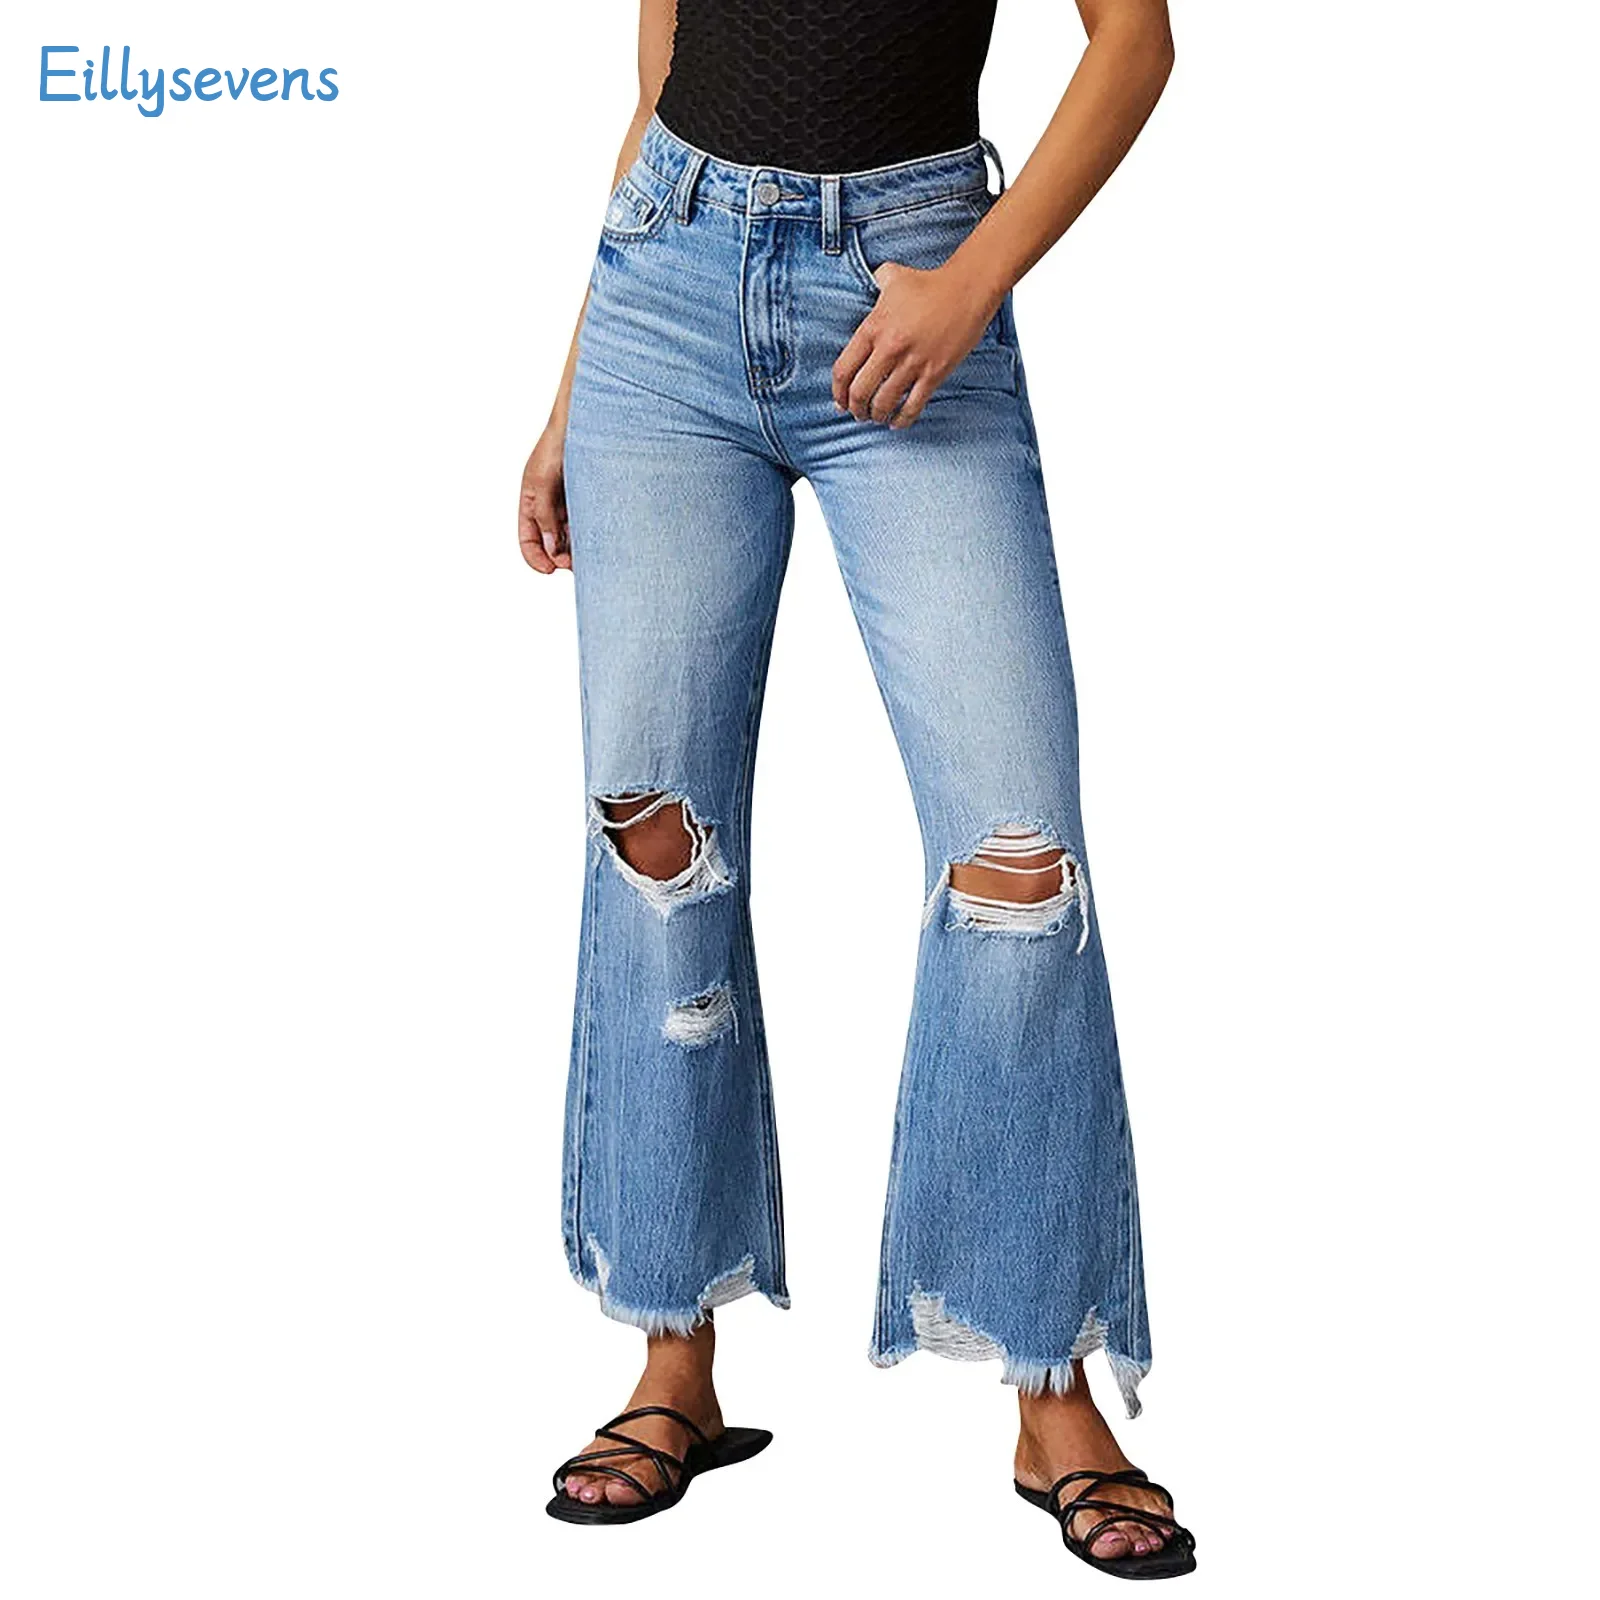 

Fashion Broken Holes Jeans Tassel Bootcut Jeans Women'S Daily Casual All-Match Street Style Cropped Pants Commuter Denim Pants